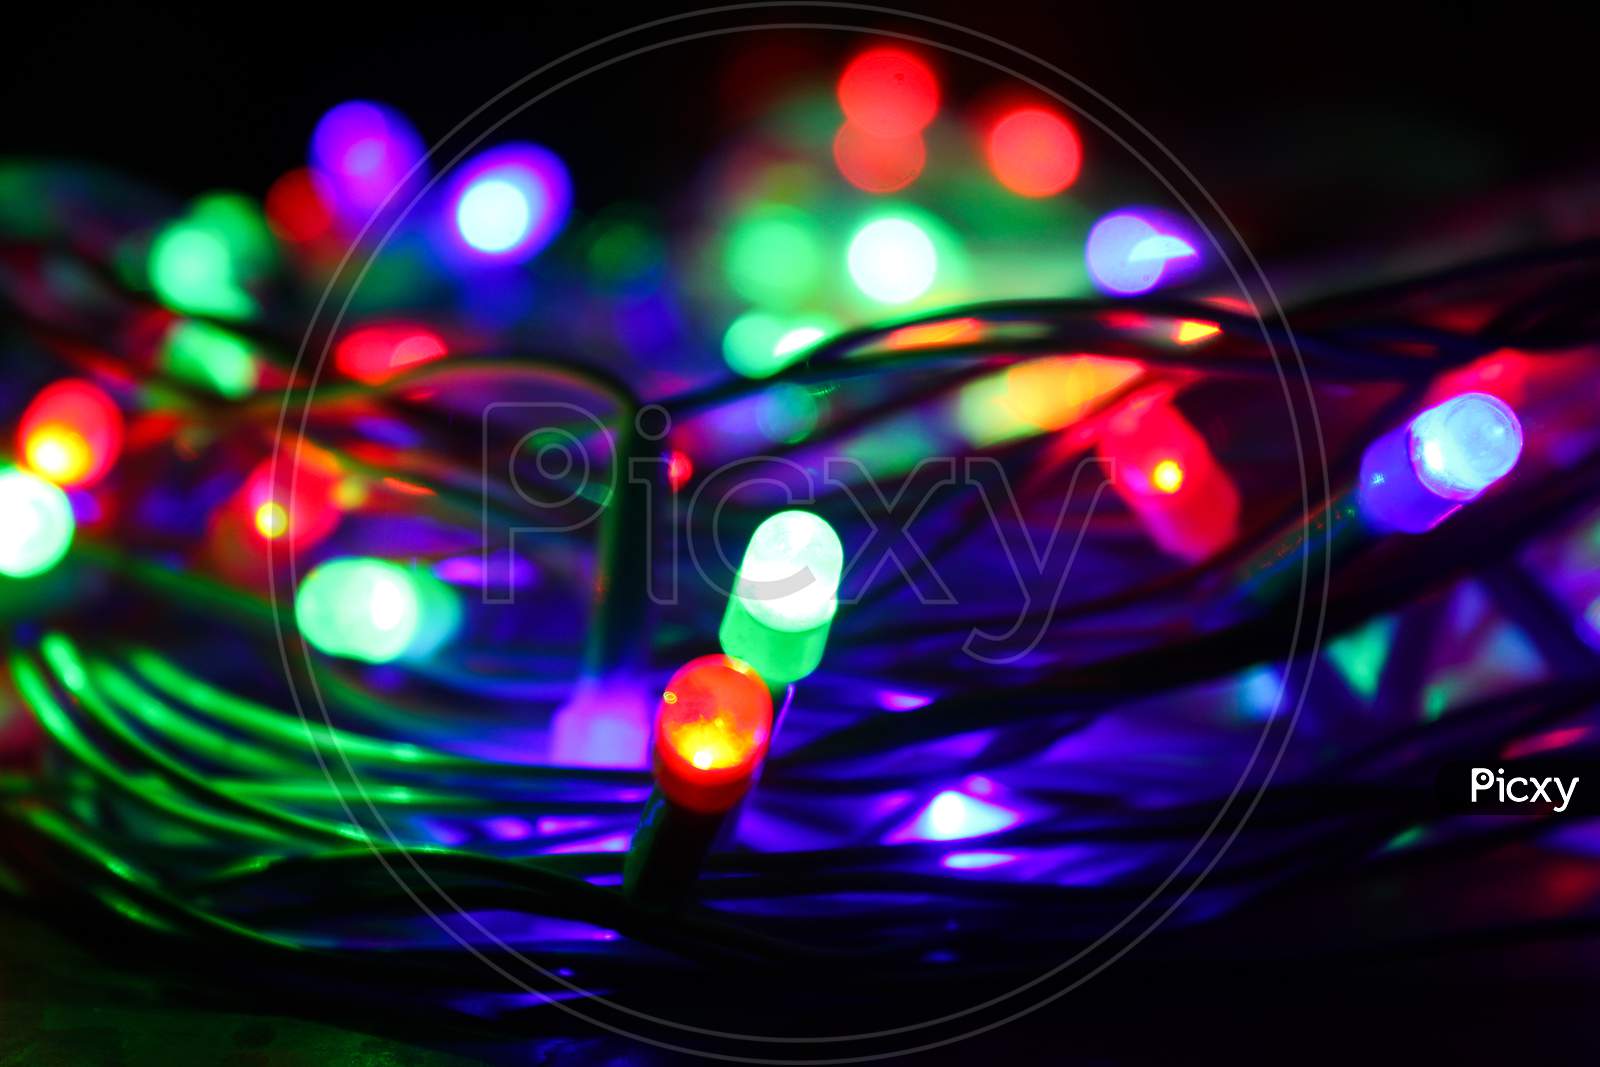 Chinese colour changer light for decoration and celebration on dipawali